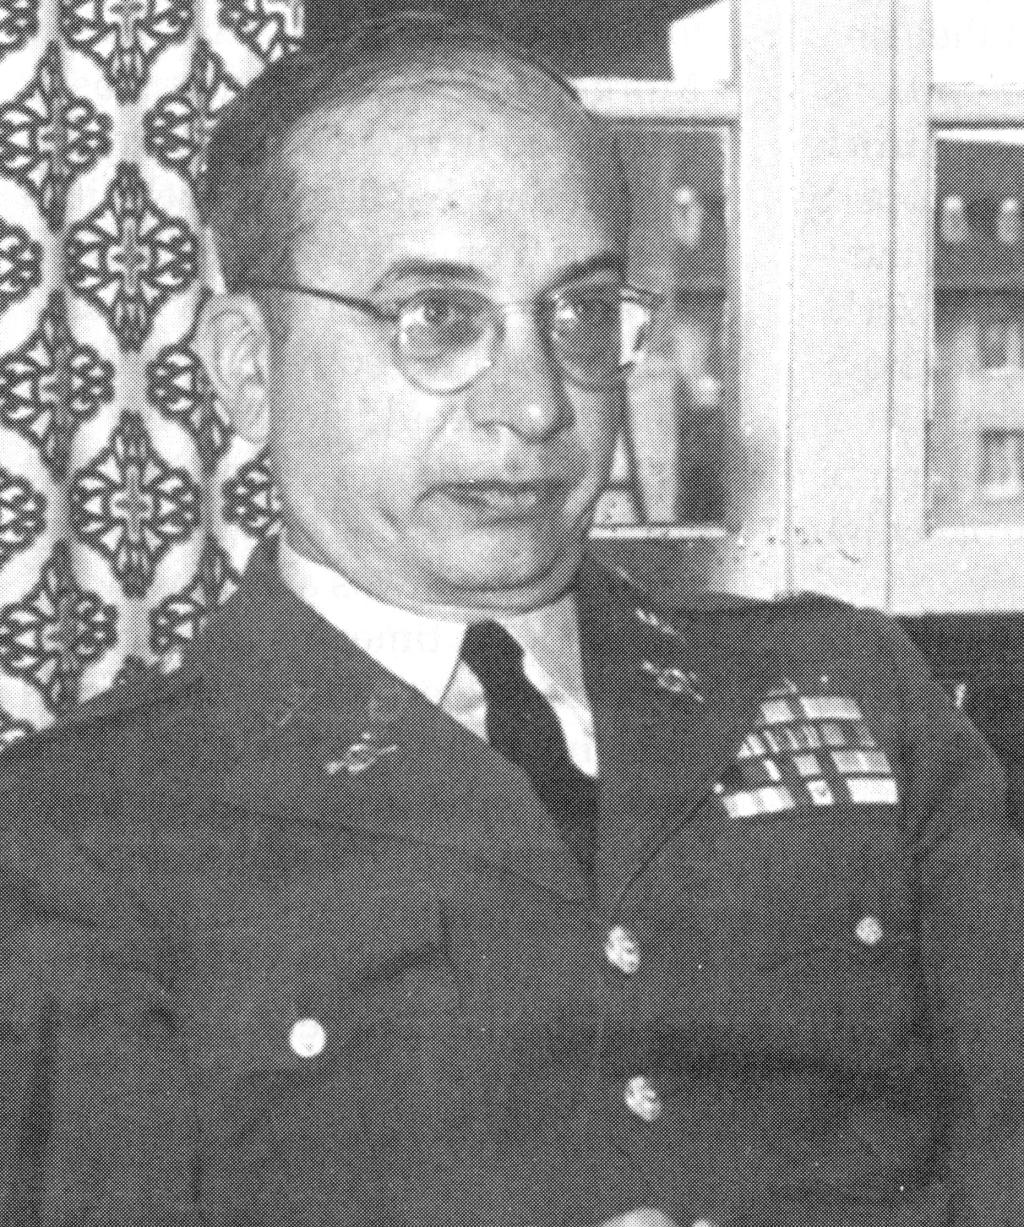 Col. Corso in uniform during his active days in the military.